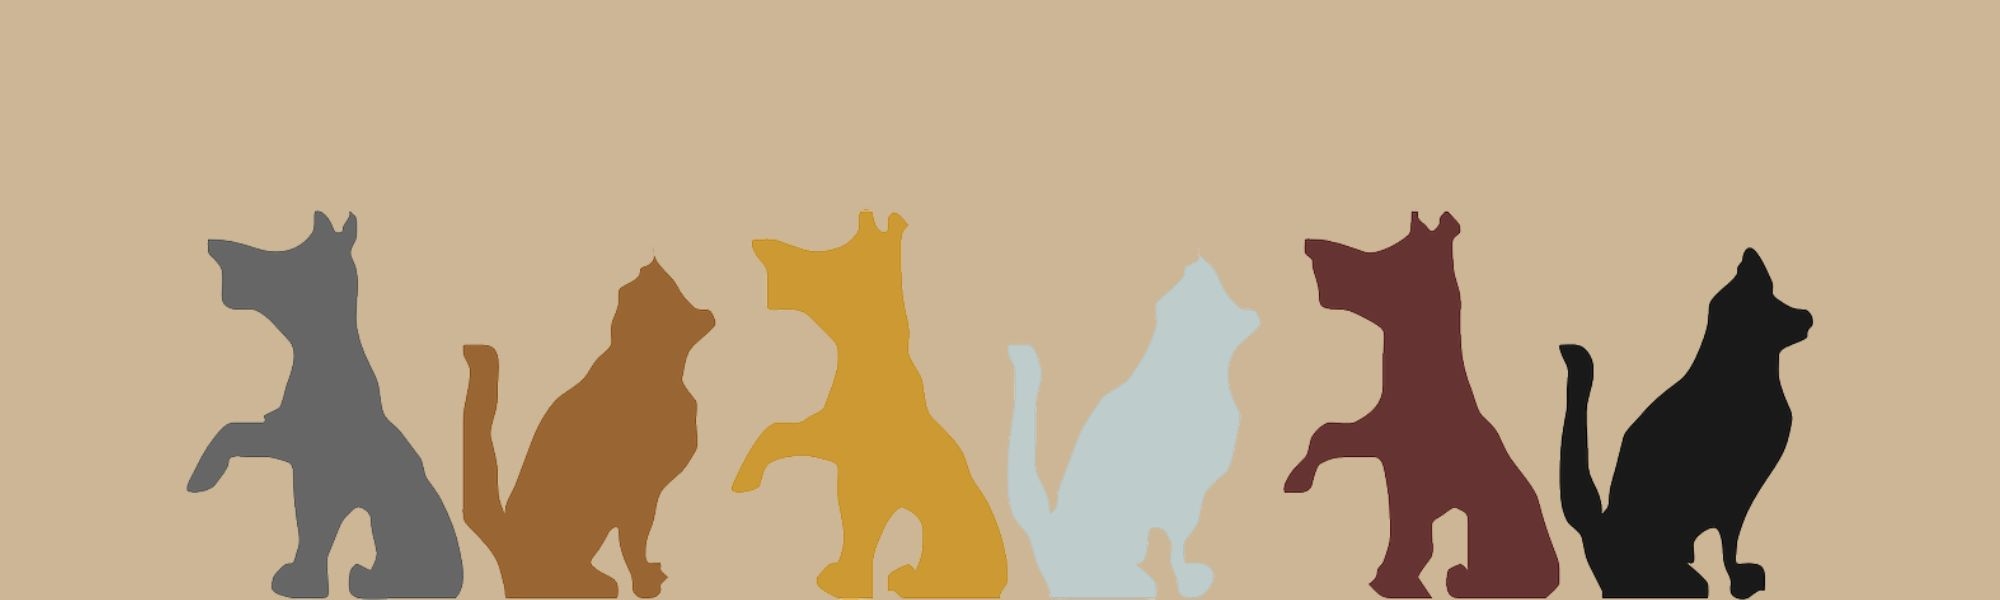 Silhouettes of cats and dogs